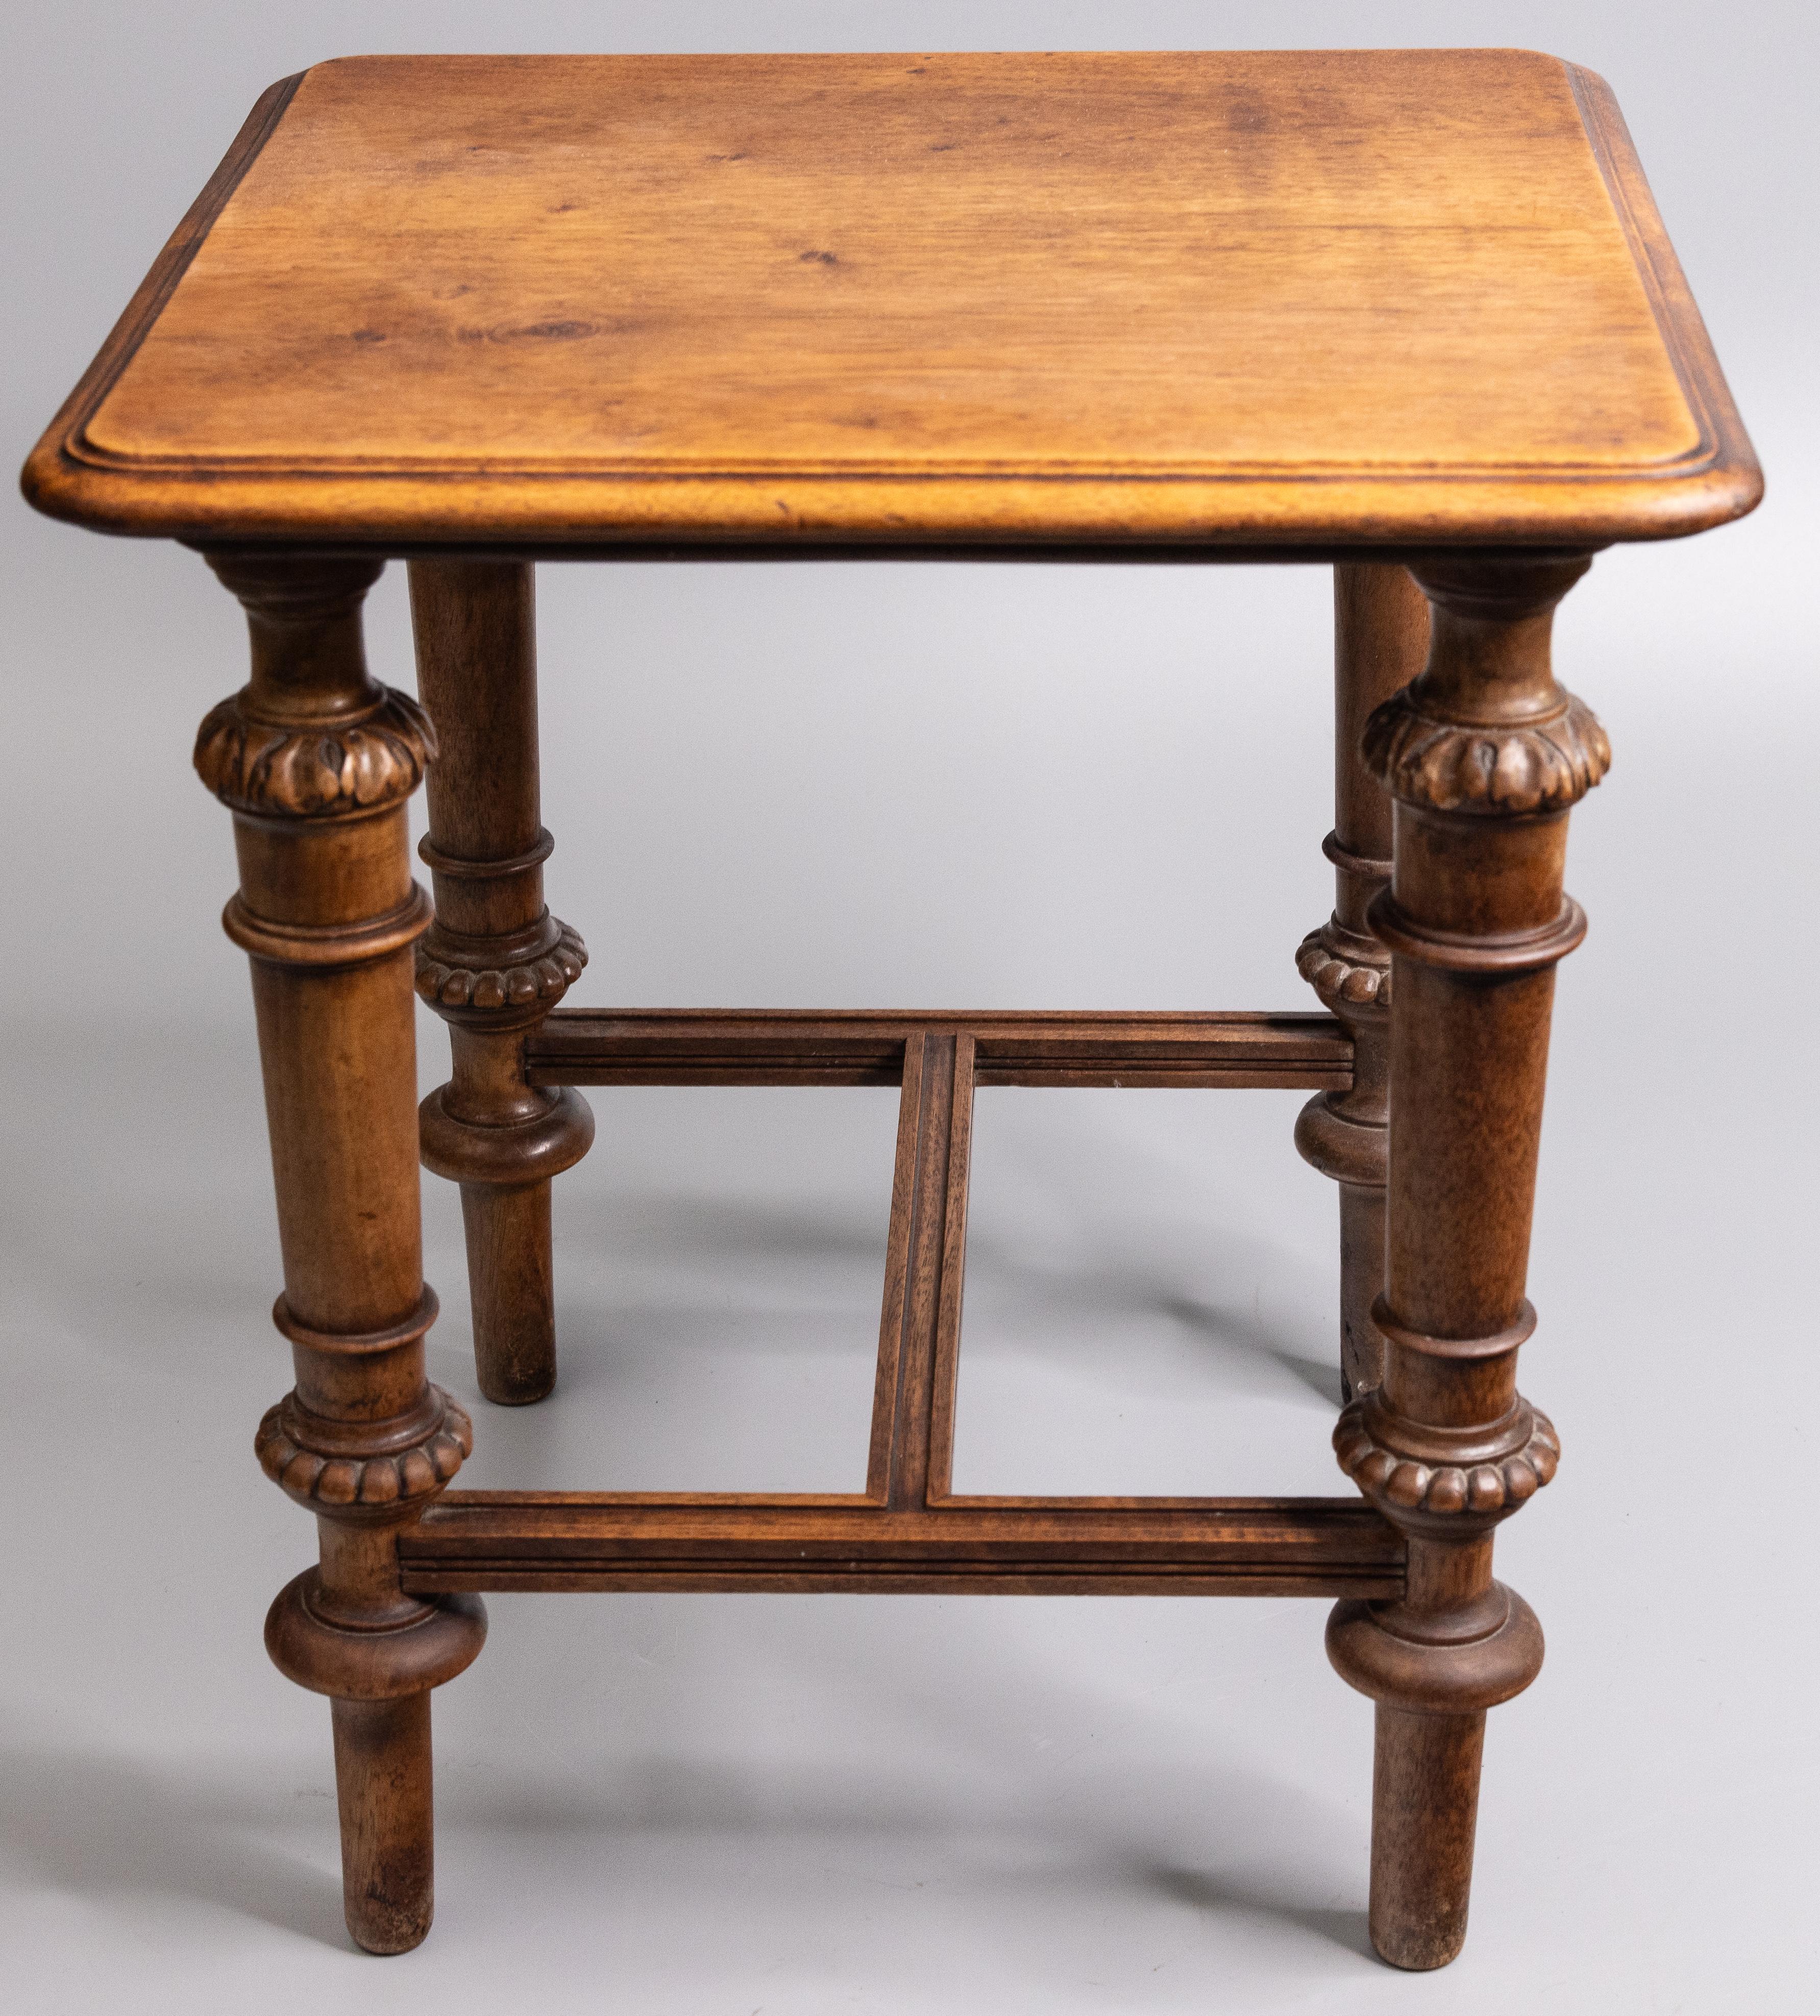 A lovely antique 19th-Century French oak hand carved side table or footstool. This charming stool would make a wonderful foot rest or a small side table, perfect for a beverage or a book.

DIMENSIONS
14ʺW × 14ʺD × 15.5ʺH